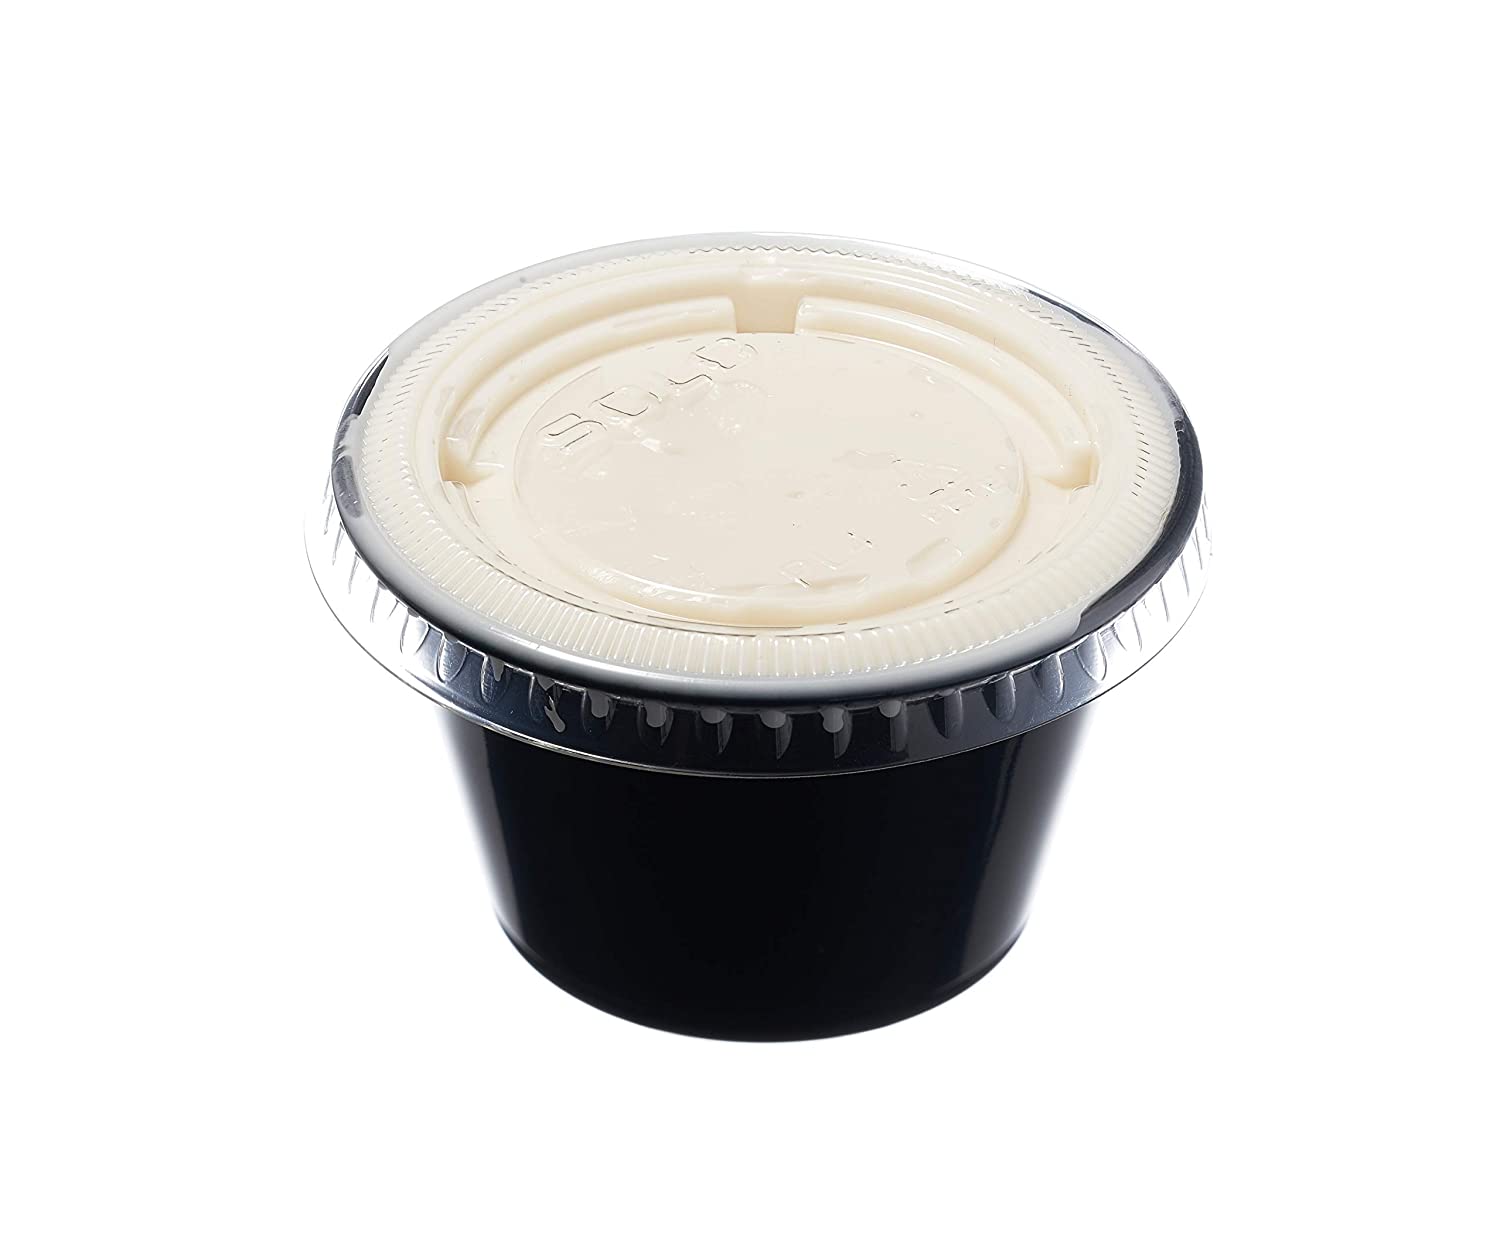 black condiment cup leakproof stackablecups ecofriendly food packaging dipping cup delivery supplies togo cup with lid tasting cups souffle cups shot cup jelloshot tasting cup taste cup portion cup deliverysolutions food packaging disposablecups ketchup mustard cup artsandcraft small cup travel size cup mouthwash cup 4 oz 4 ounce cup with lid hotsauce cup